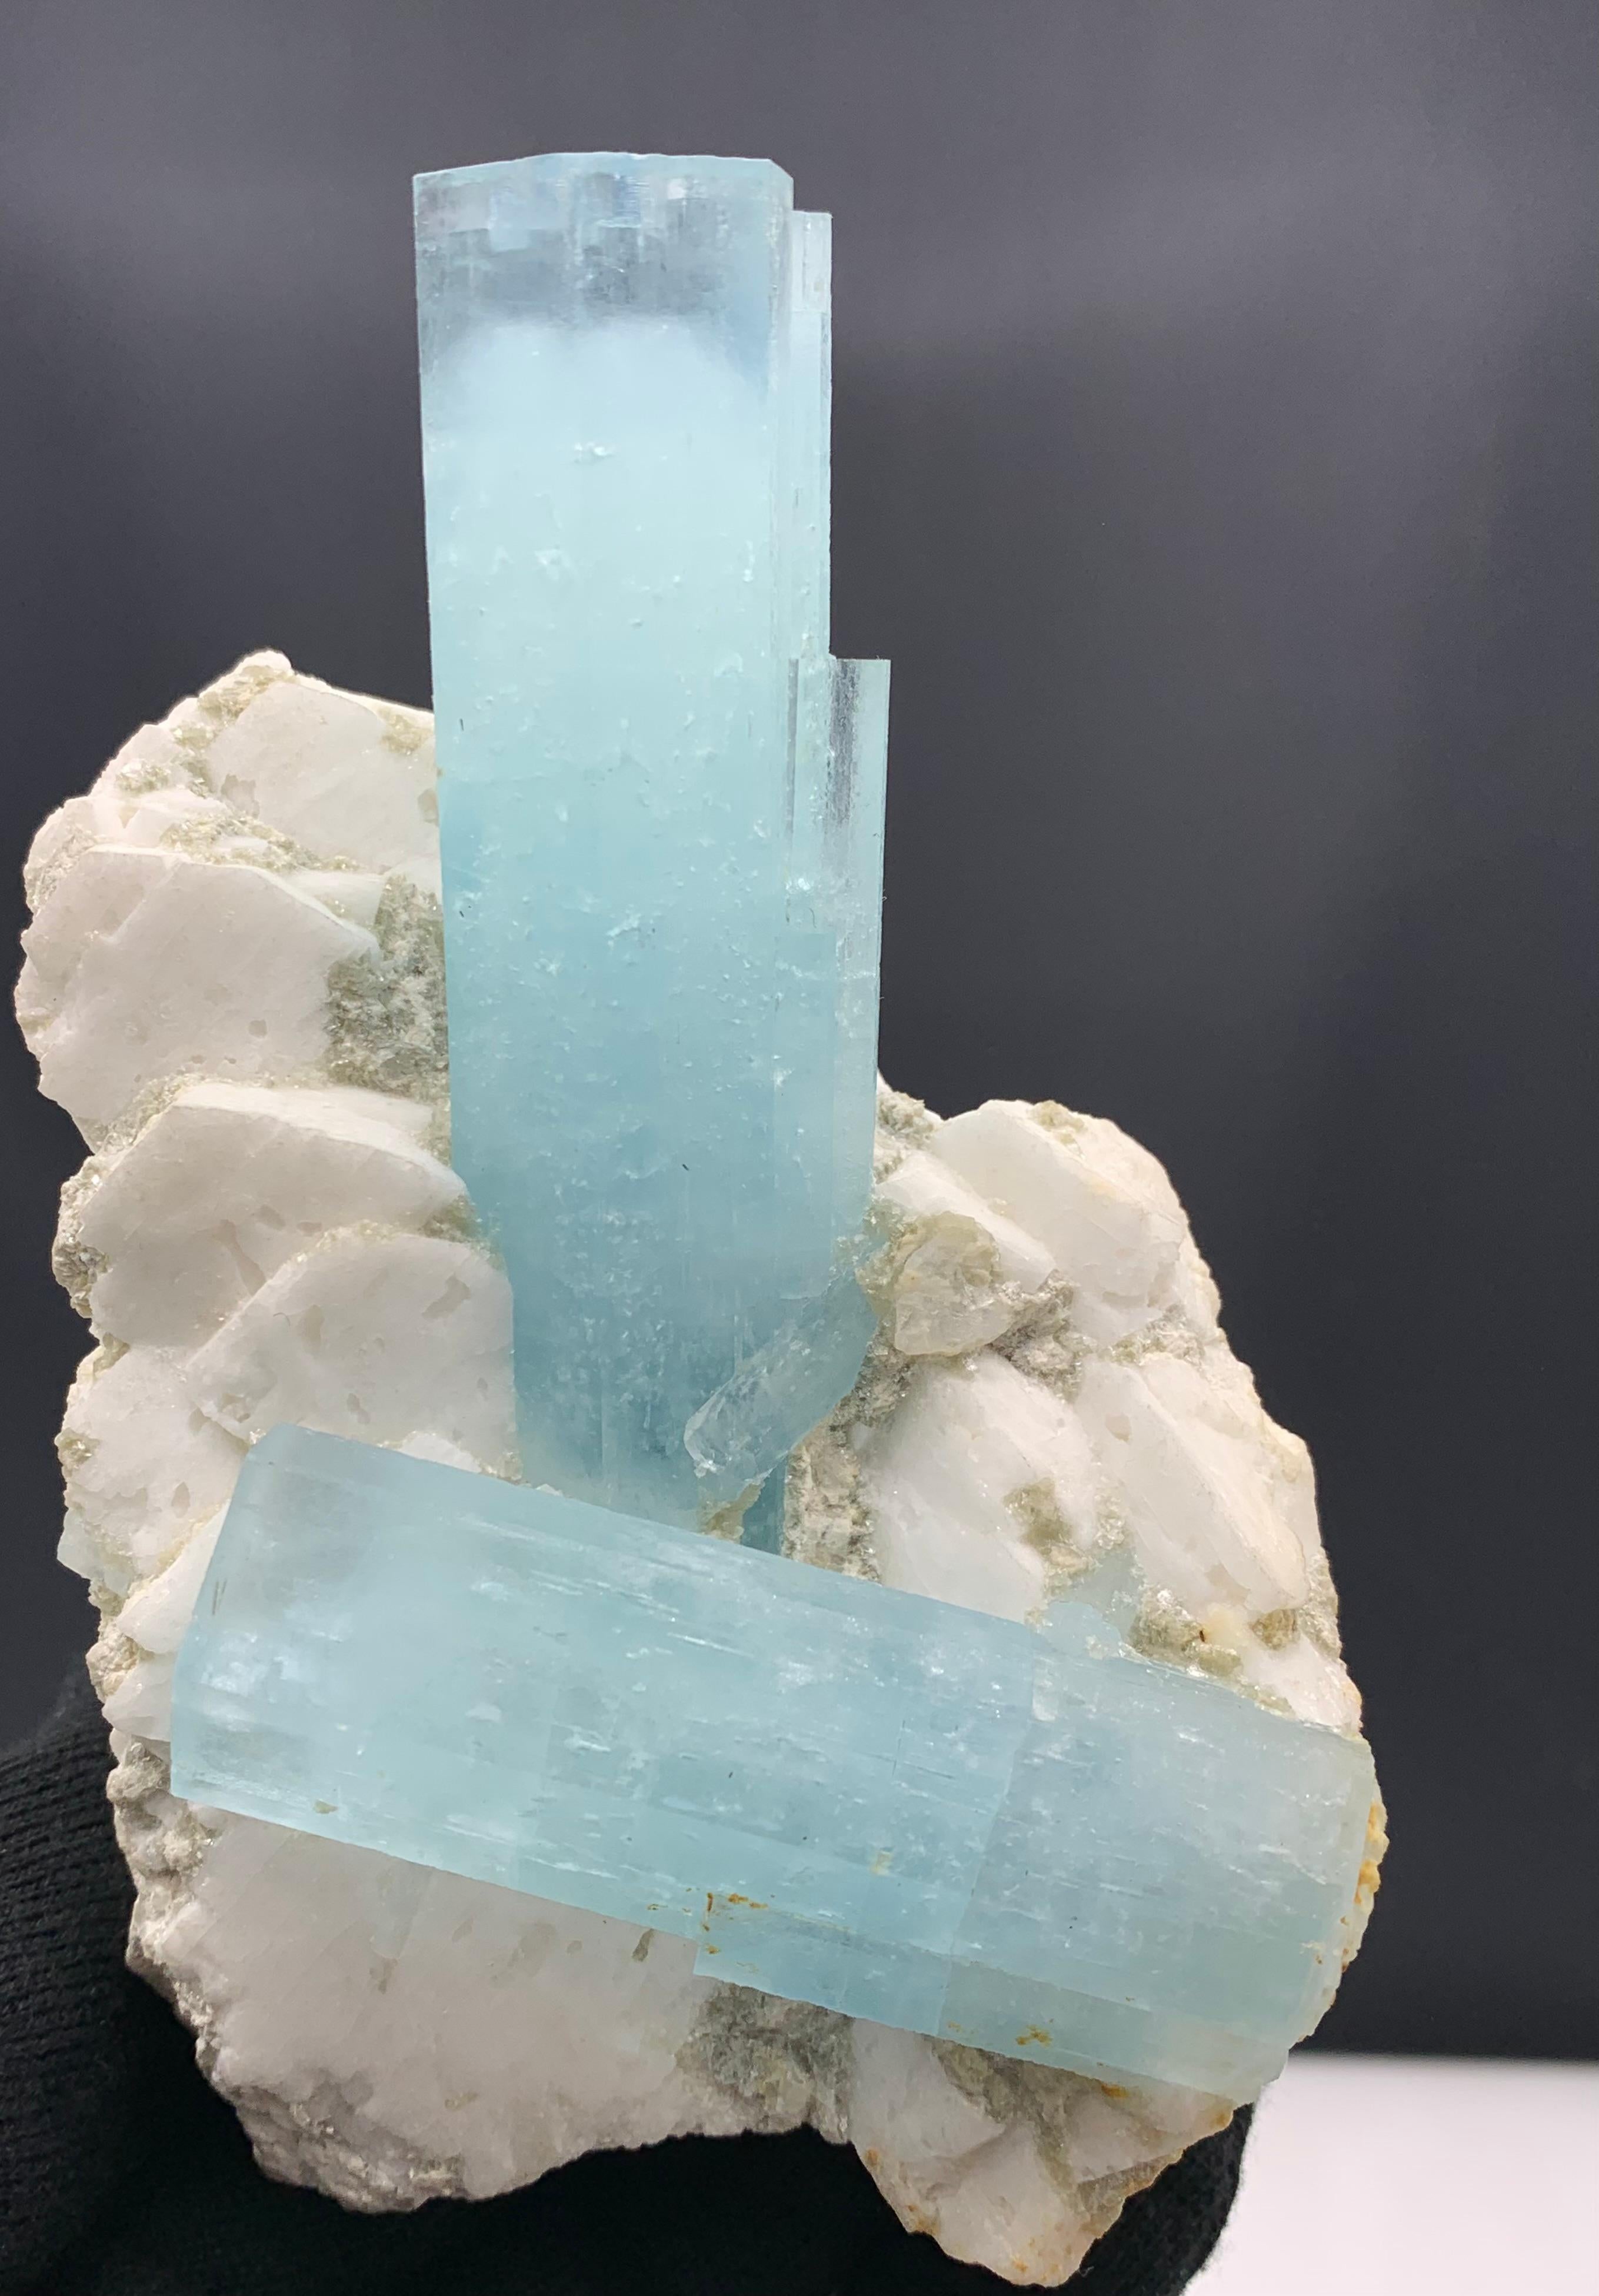 Weight: 428.97 Gram 
Dimension: 12 x 7.9 x 5.6 Cm
Origin: Shigar Valley, Skardu District, Gilgit Baltistan Province, Pakistan

Aquamarine is a pale-blue to light-green variety of beryl. The color of aquamarine can be changed by heat. Aquamarine has